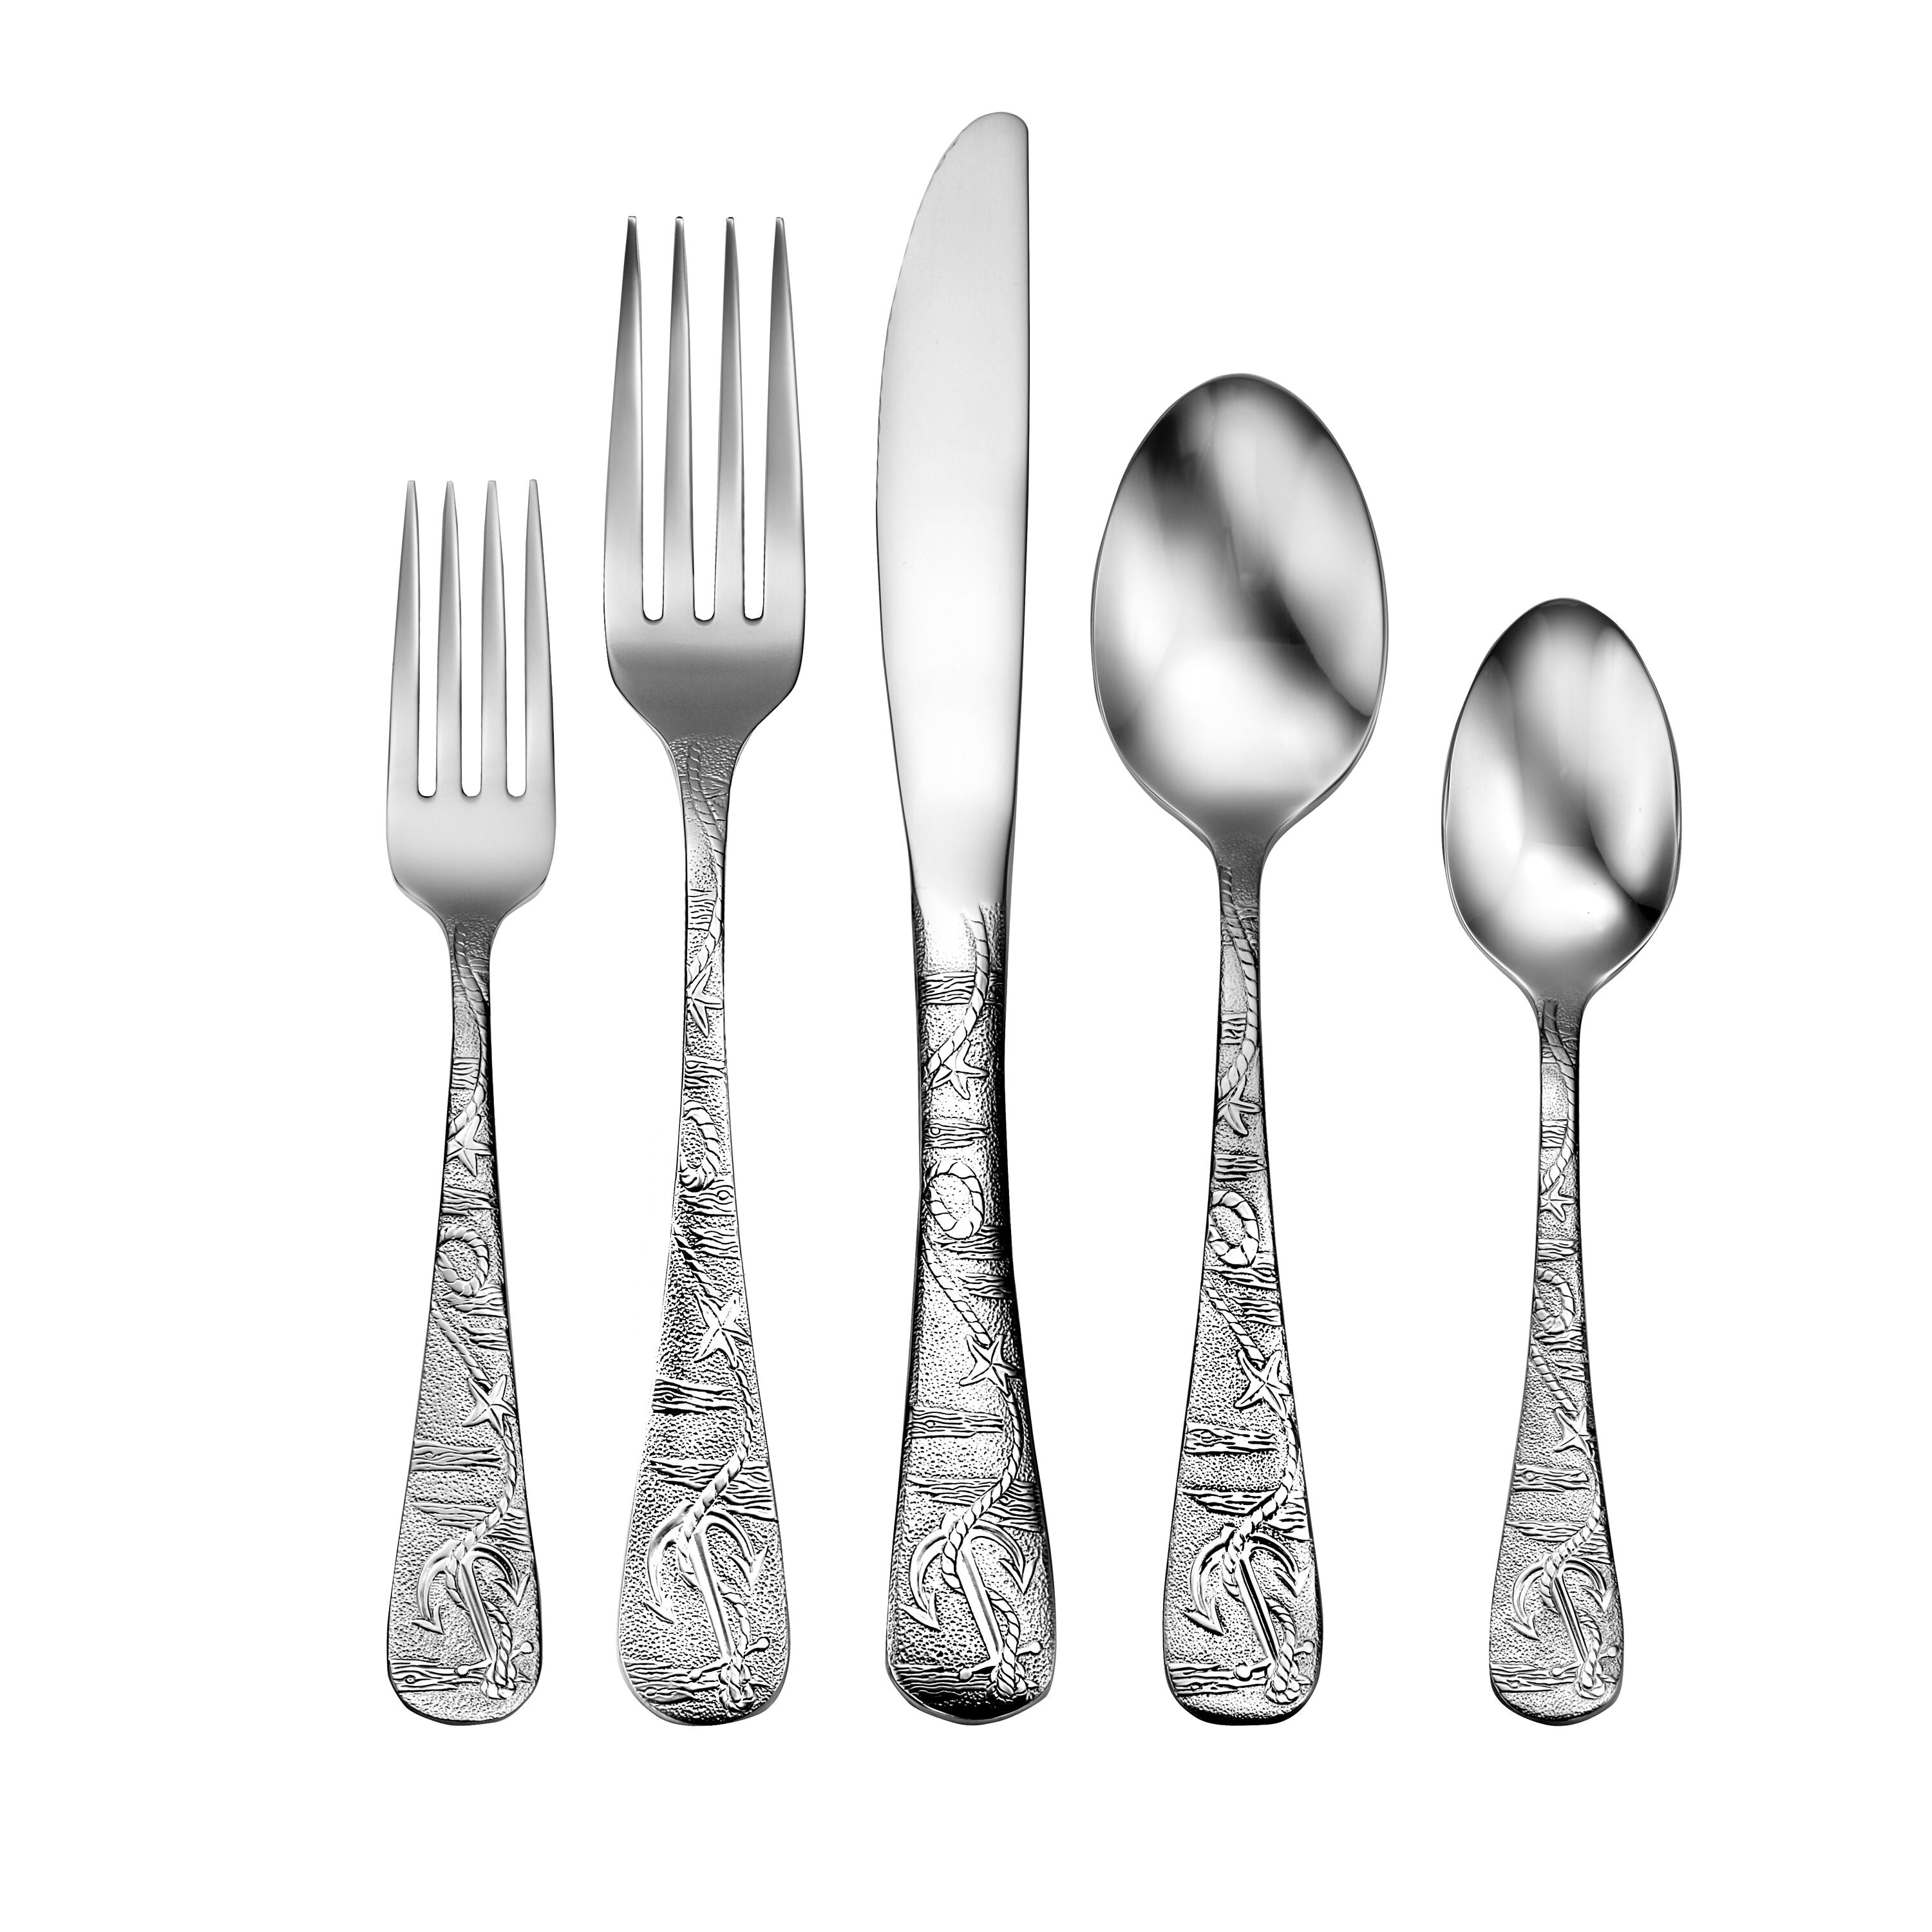 Susanna - Liberty Tabletop - The Only Flatware Made in the USA